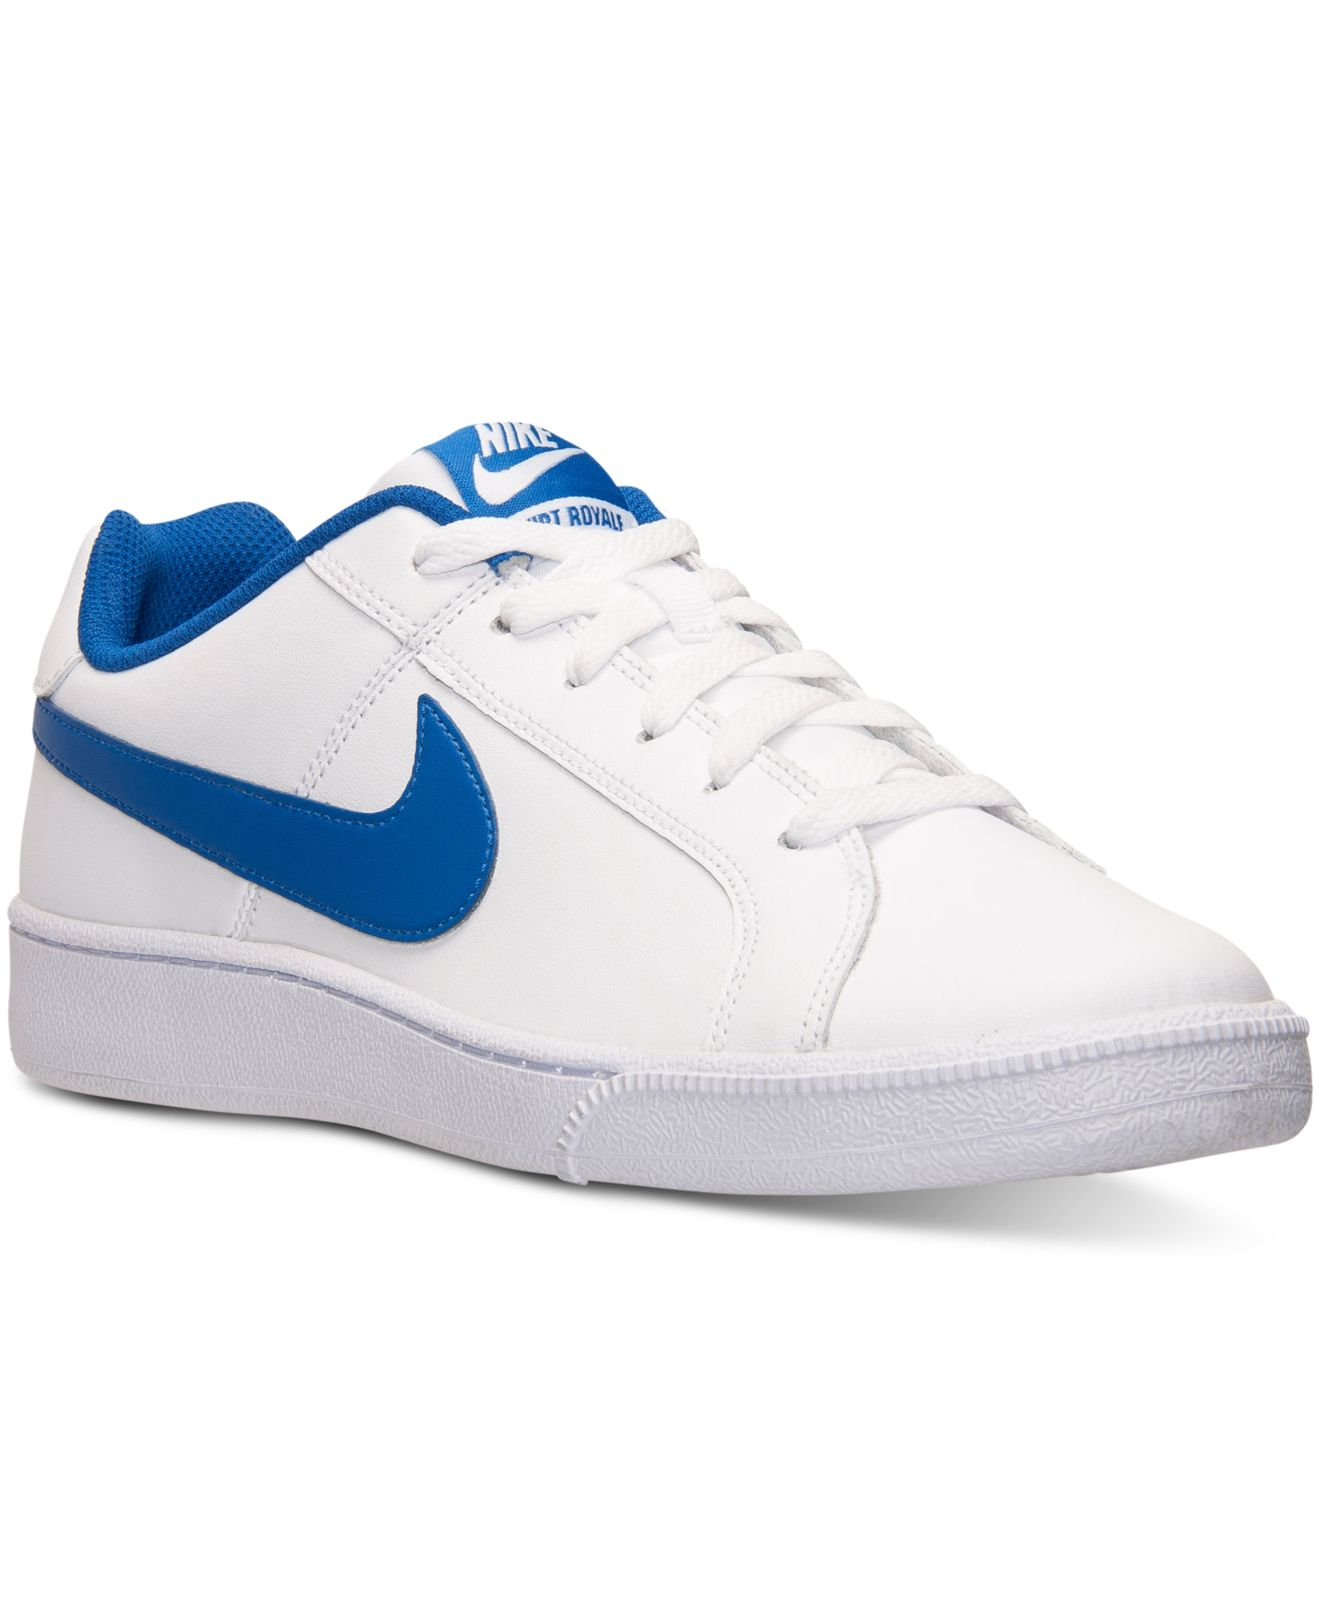 Lyst Nike Men s Court Royale Casual Sneakers From Finish Line in